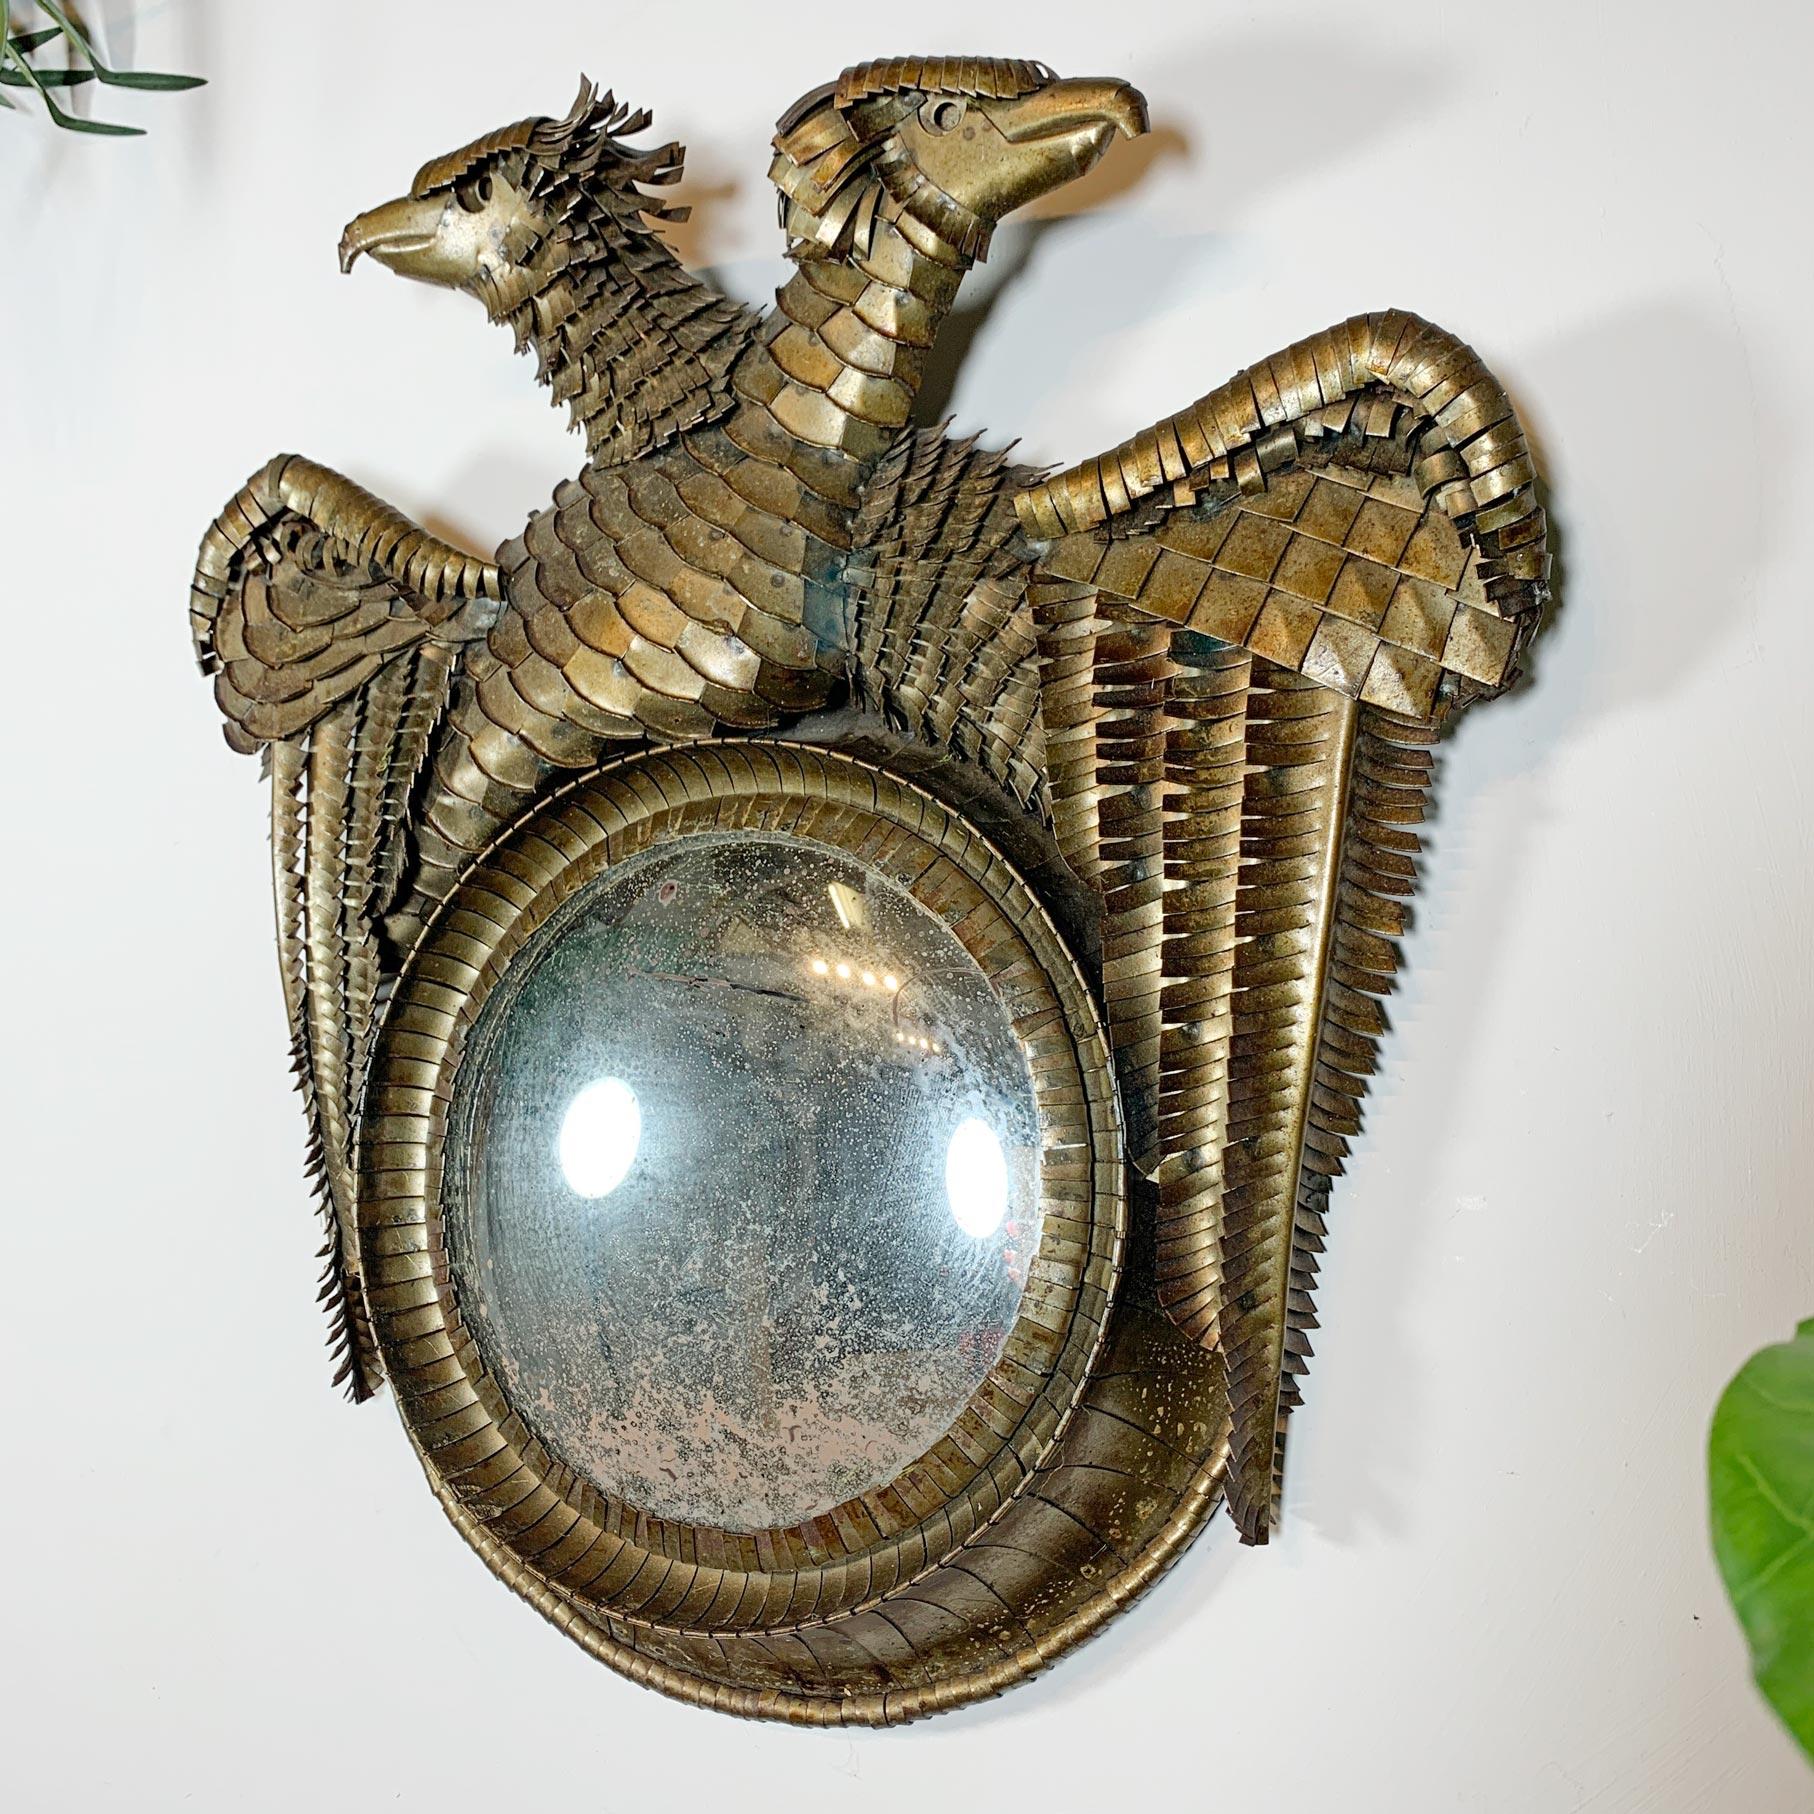 A superb double Eagle convex mirror created by the French Artist, sculptor and jewellery designer Leon Masson (1911-1984) dating to the early 1950's, the convex mirror sits within the frame, which has been crafted by Masson using cut and welded